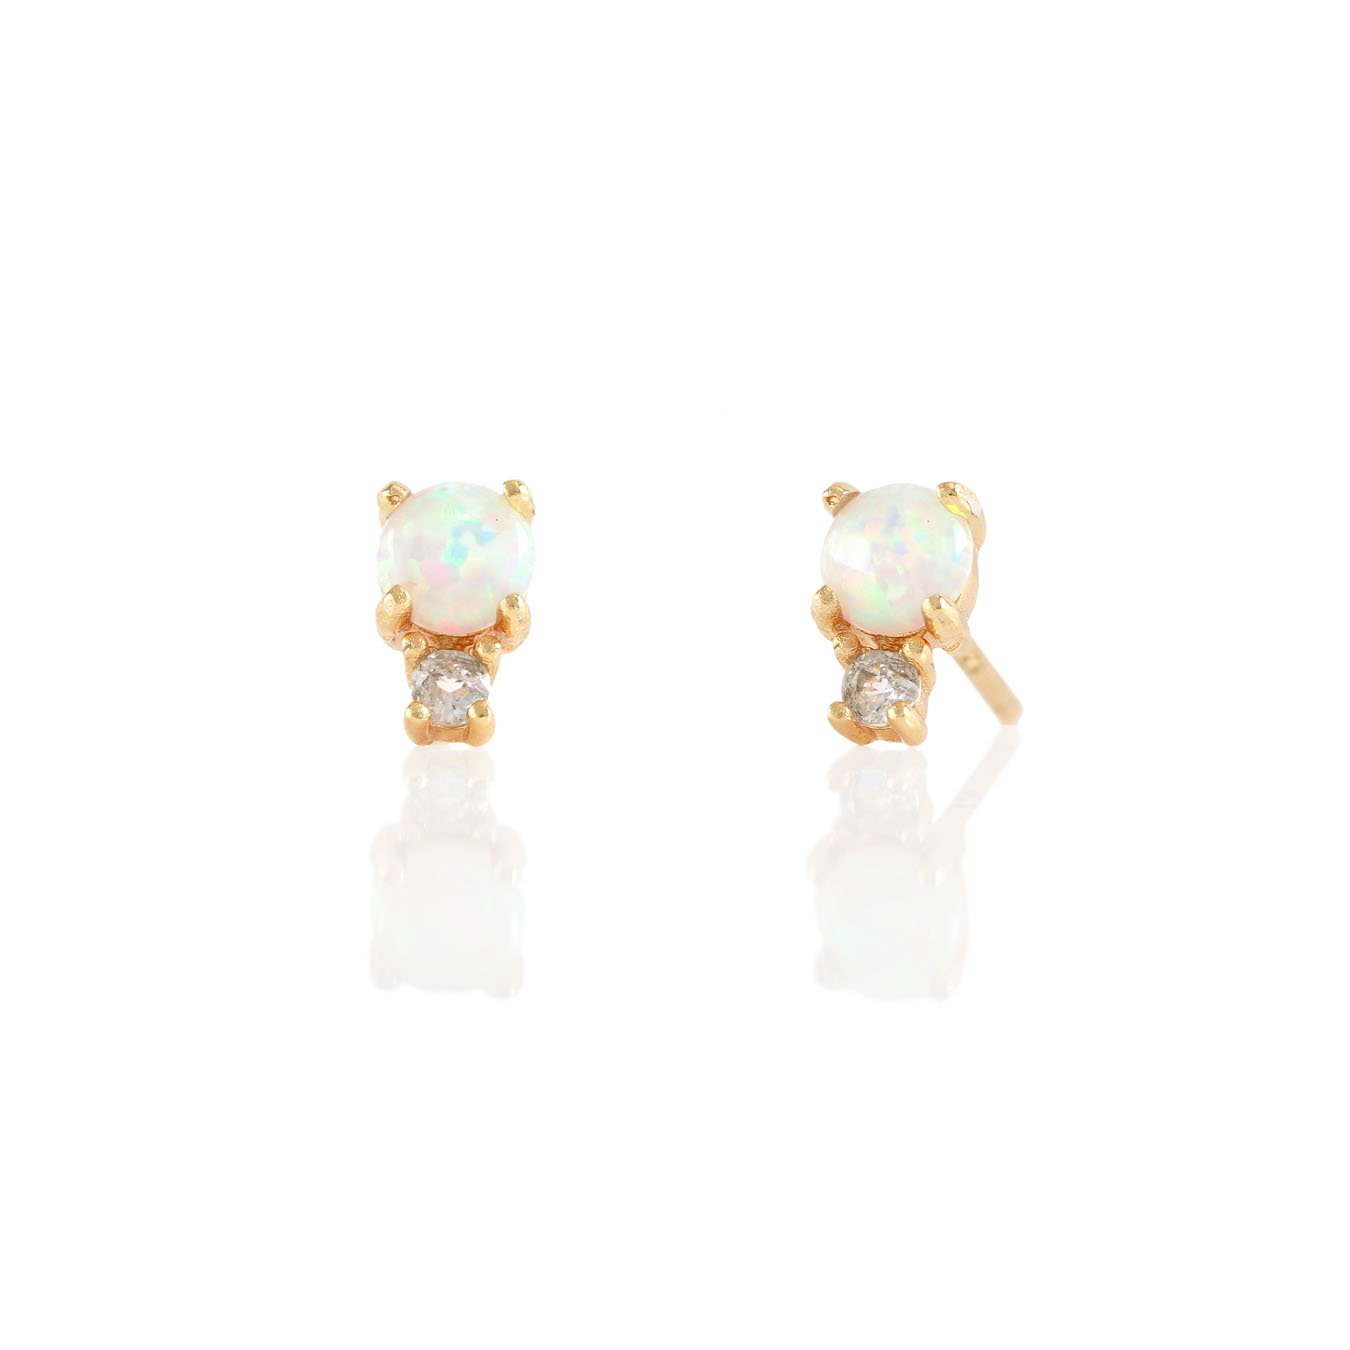 Two Stone Stud Earrings with White Topaz and Opal